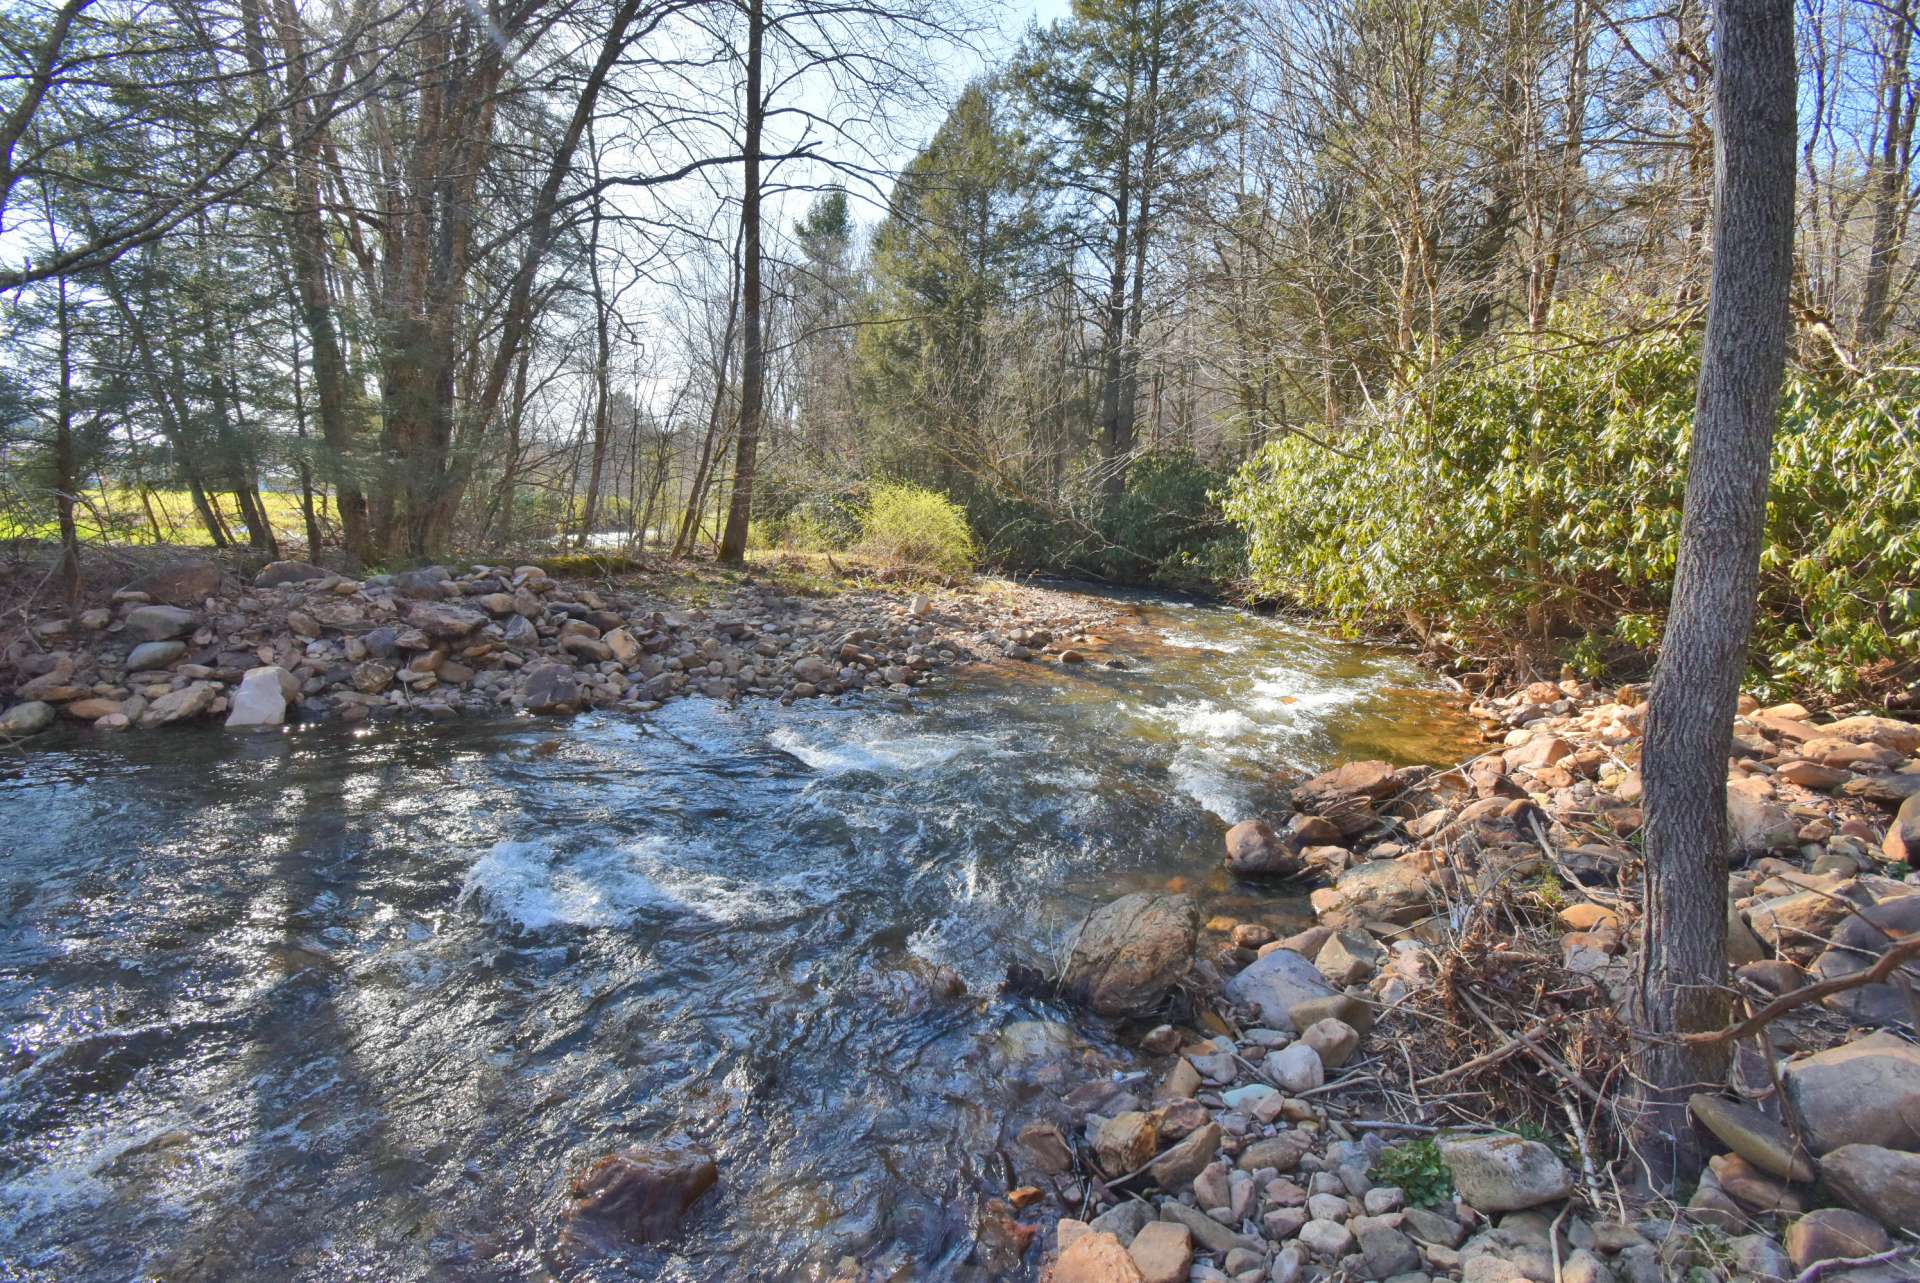 At the back of the property you will find lots of Creekside recreation. Enjoy the fresh waters of Whitetop Laurel Creek, ranked as one of the finest natural wild trout streams in the Southeastern U.S.